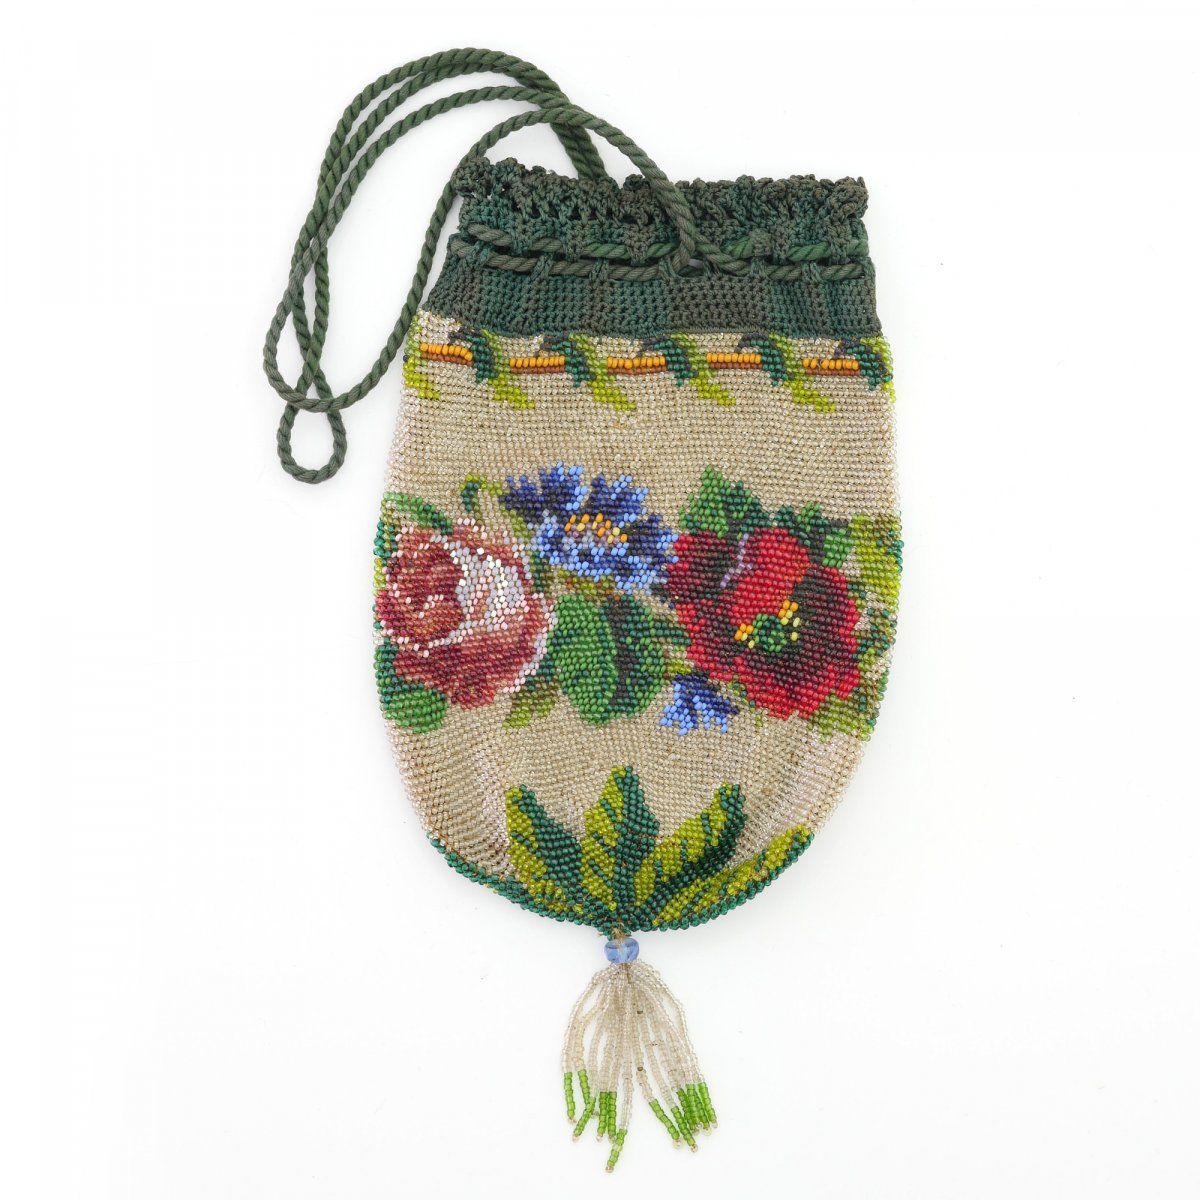 Null Pouch with floral border, c. 1900, H. 25 x 13.5 cm. Crocheted polychrome be&hellip;